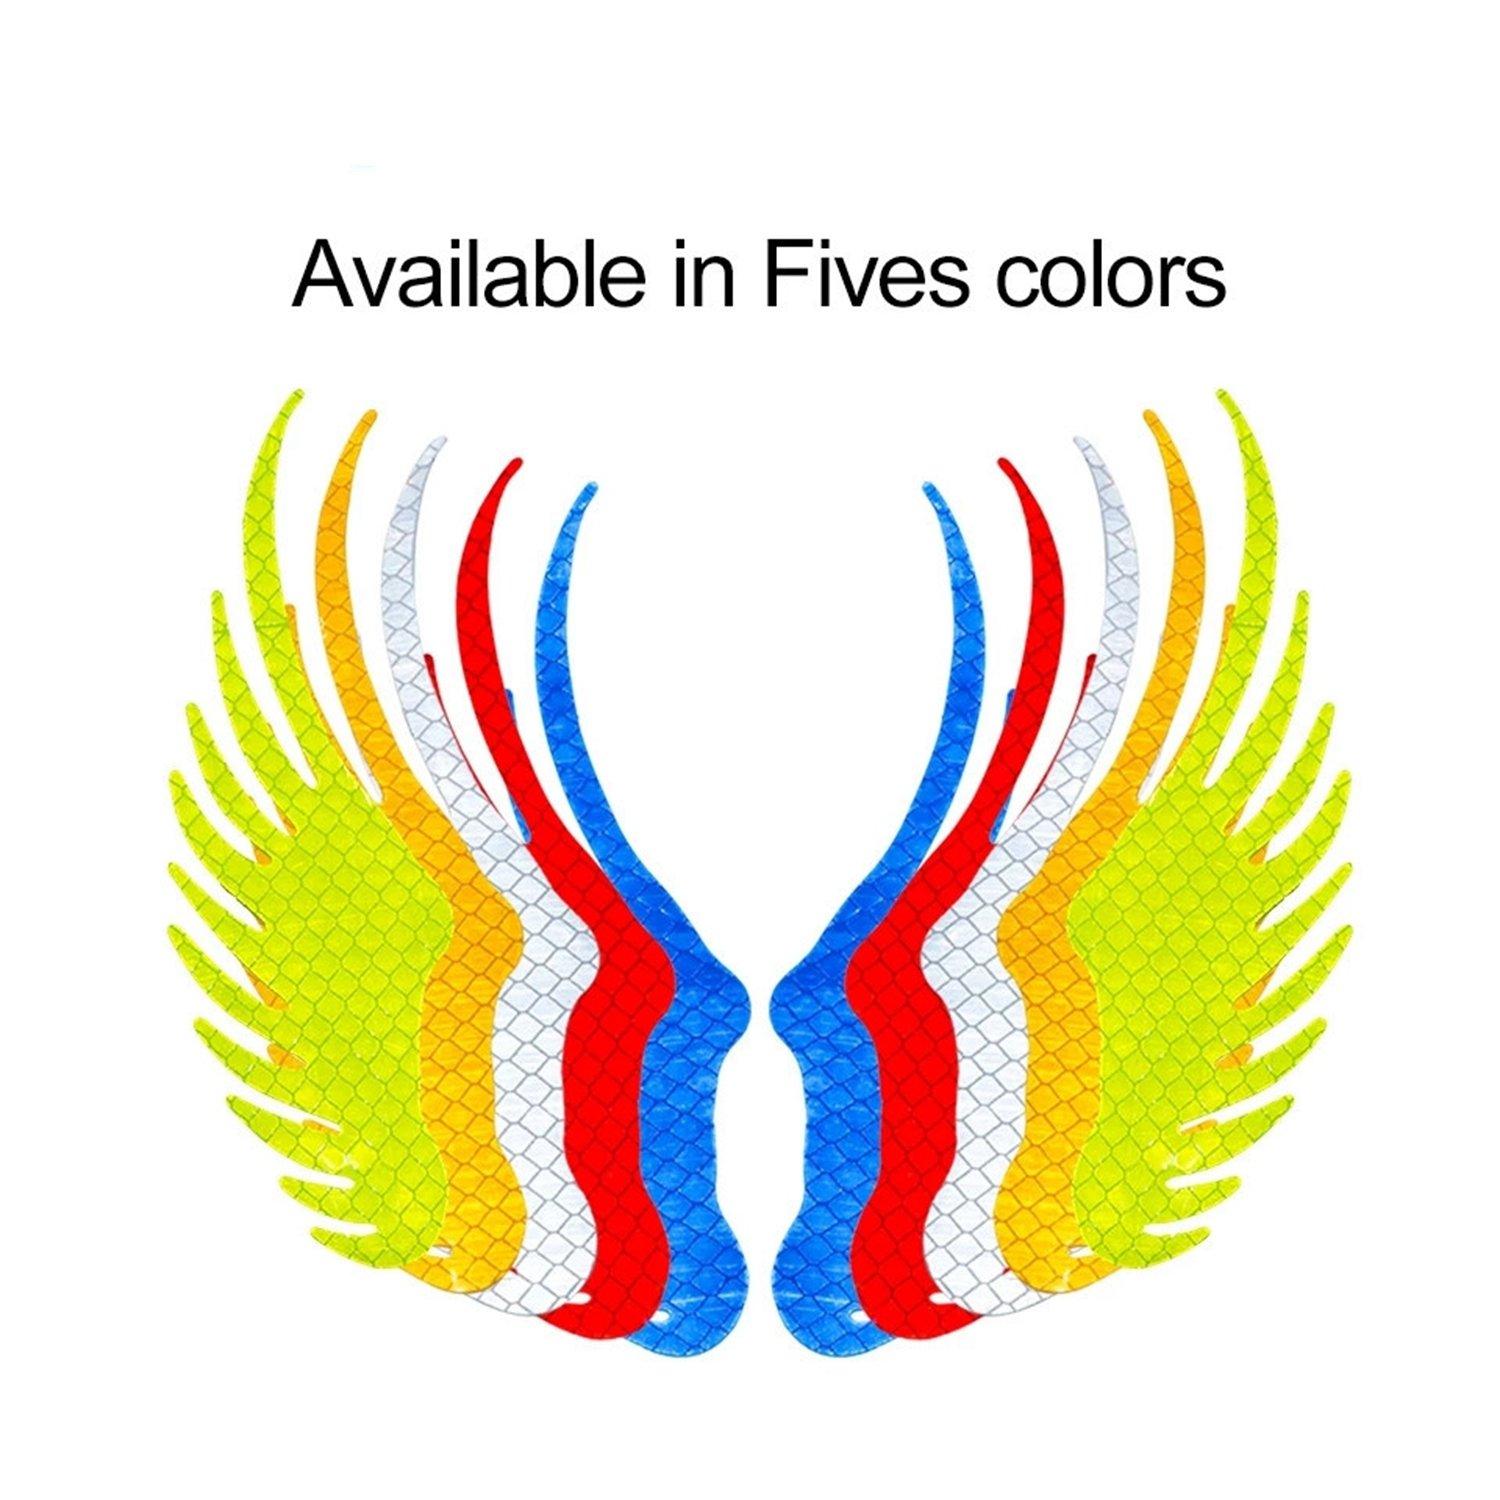 2 Pcs 3D Strong Reflective Wings Stickers - StiCool